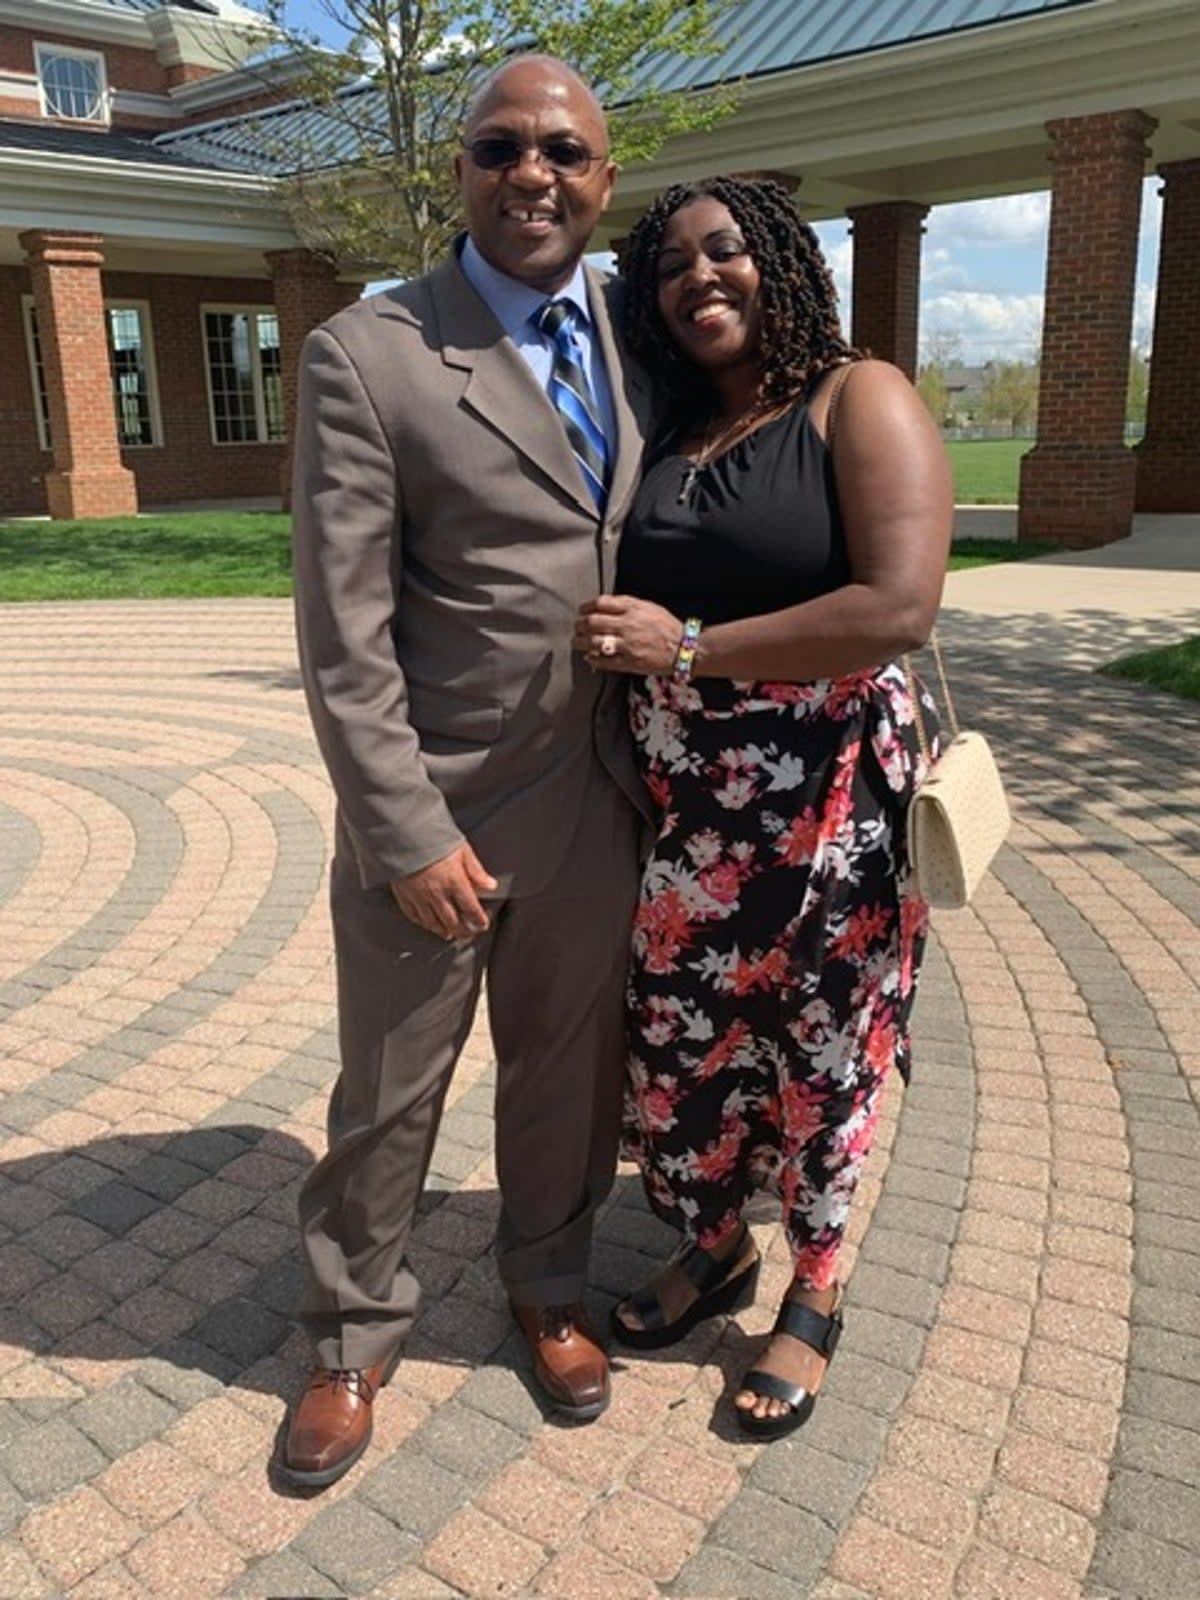 Ohio engineer Eric Nshimiye, who has been charged by federal authorities in connection with alleged genocidal activities in his native Rwanda dating back decades, poses with his wife (Nshimiye Family)